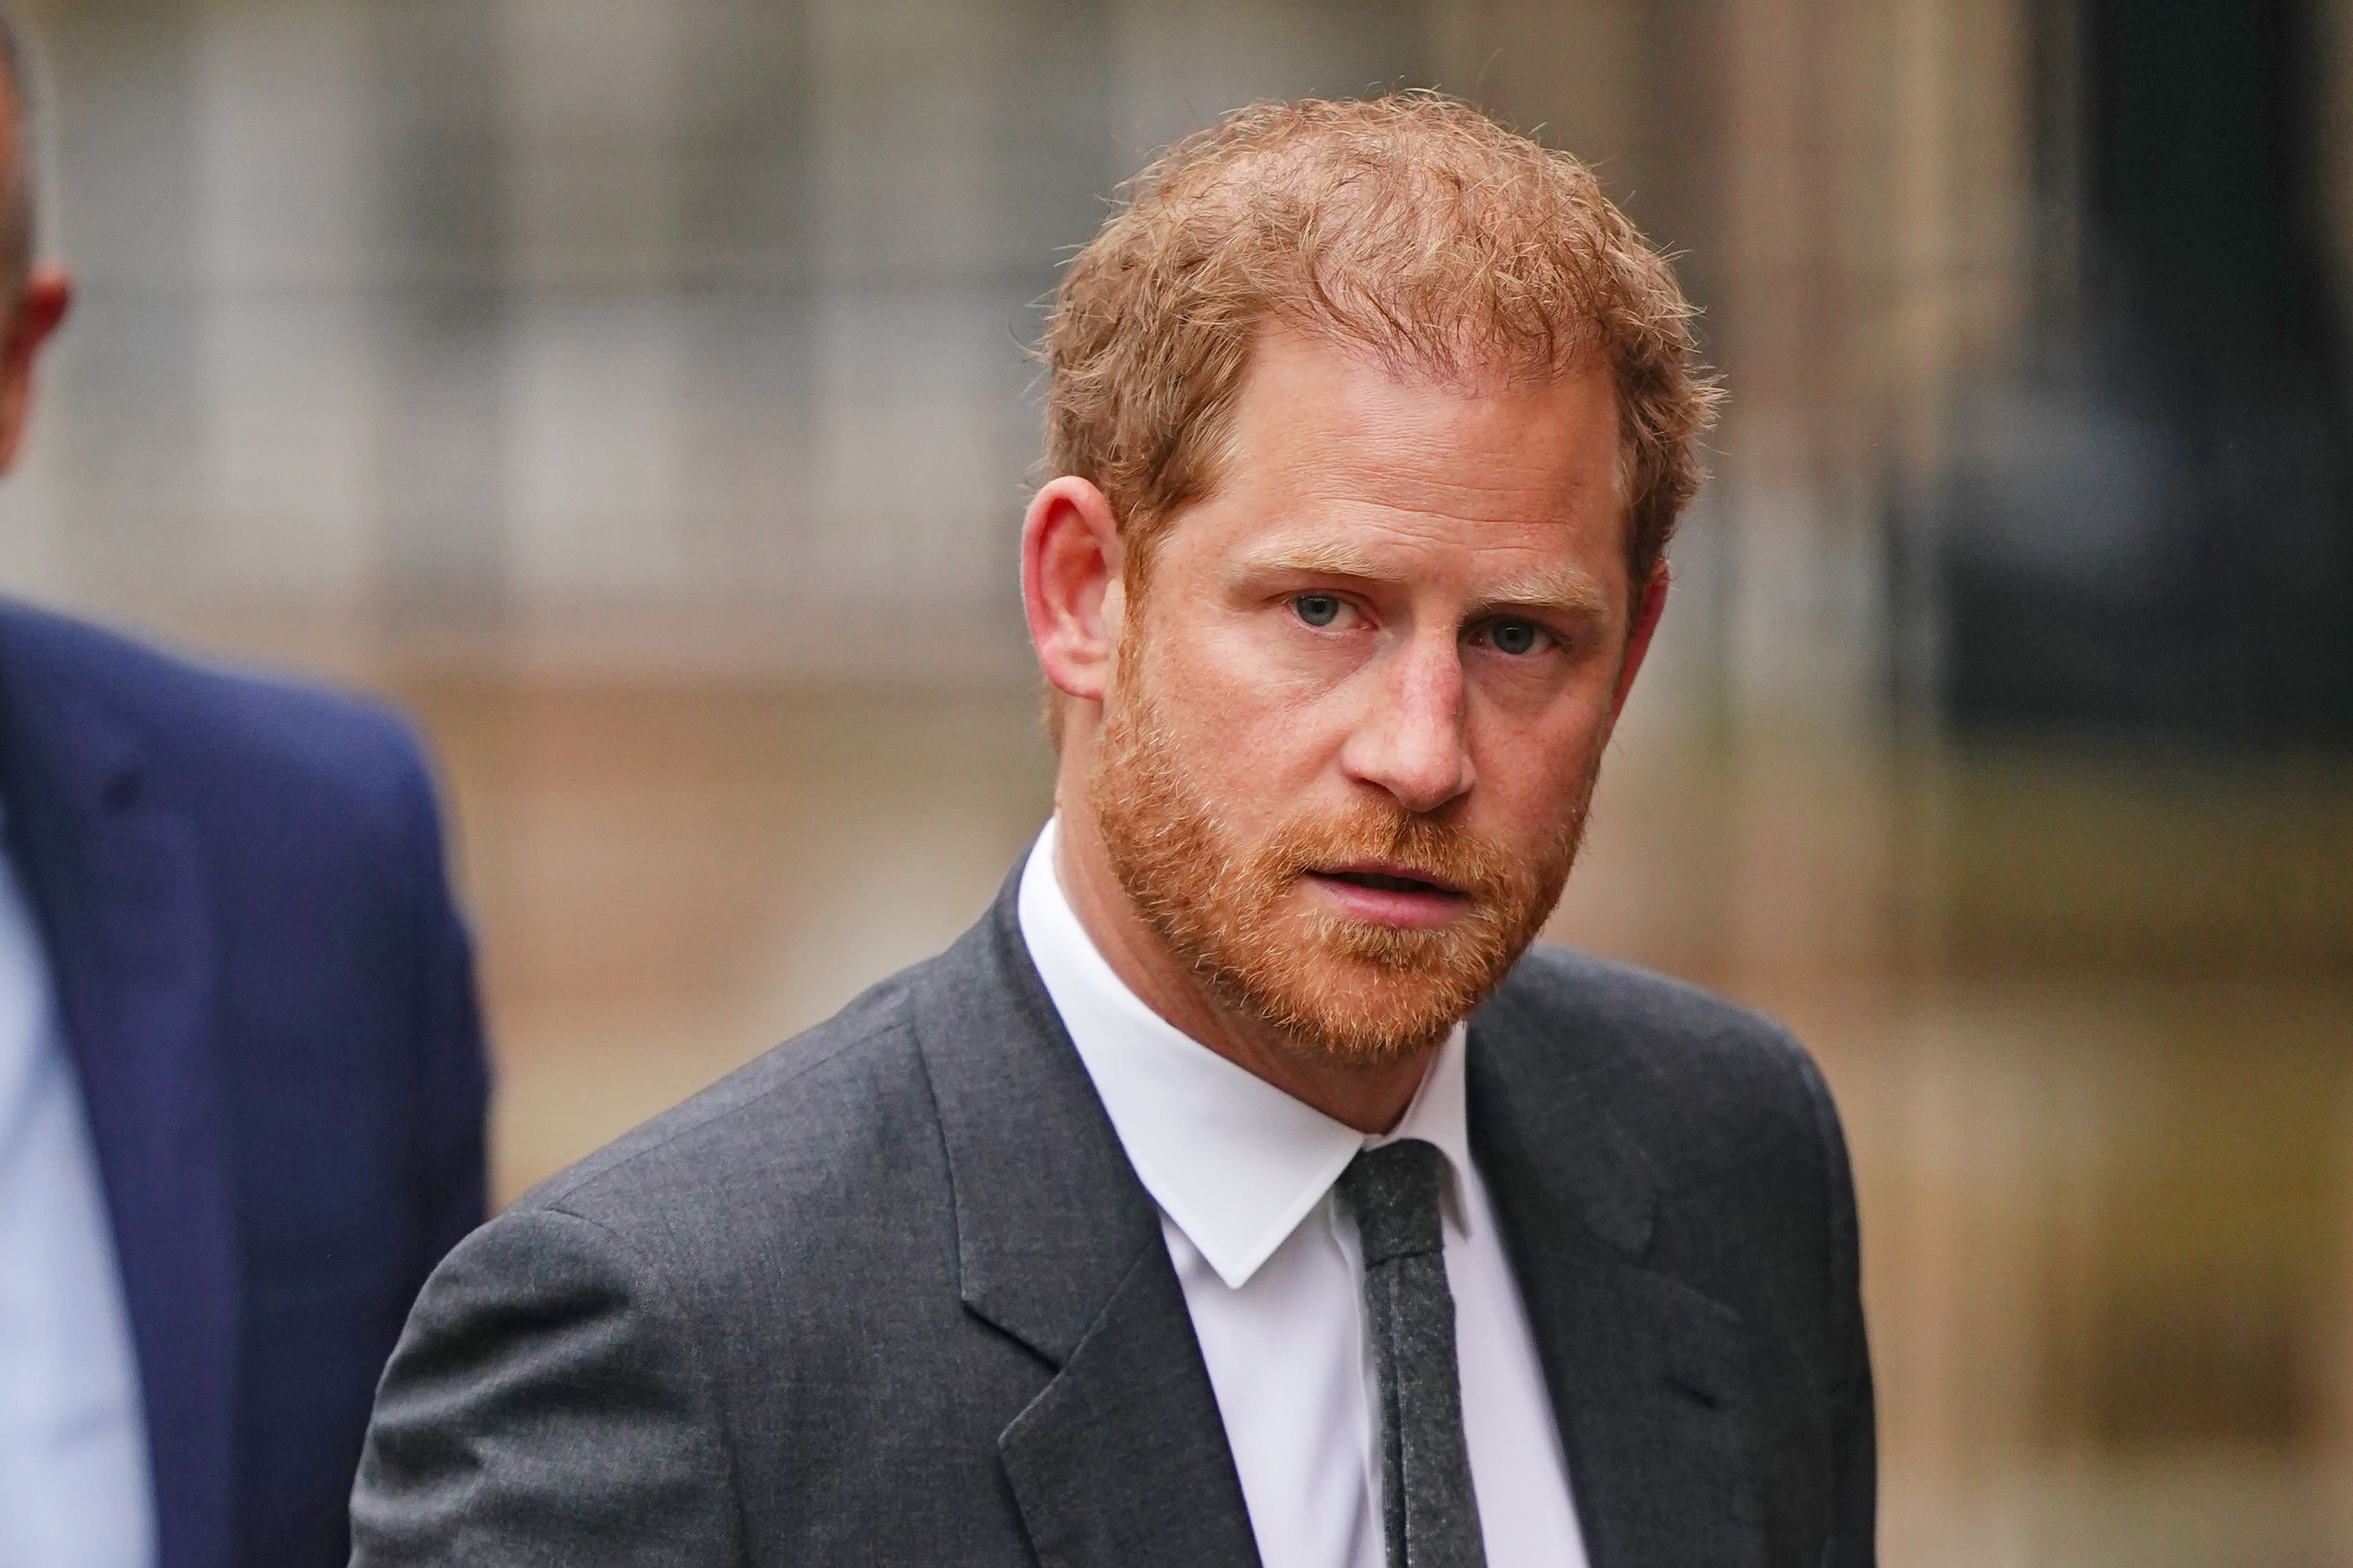 Prince Harry attended a case against the Daily Mail publisher last month